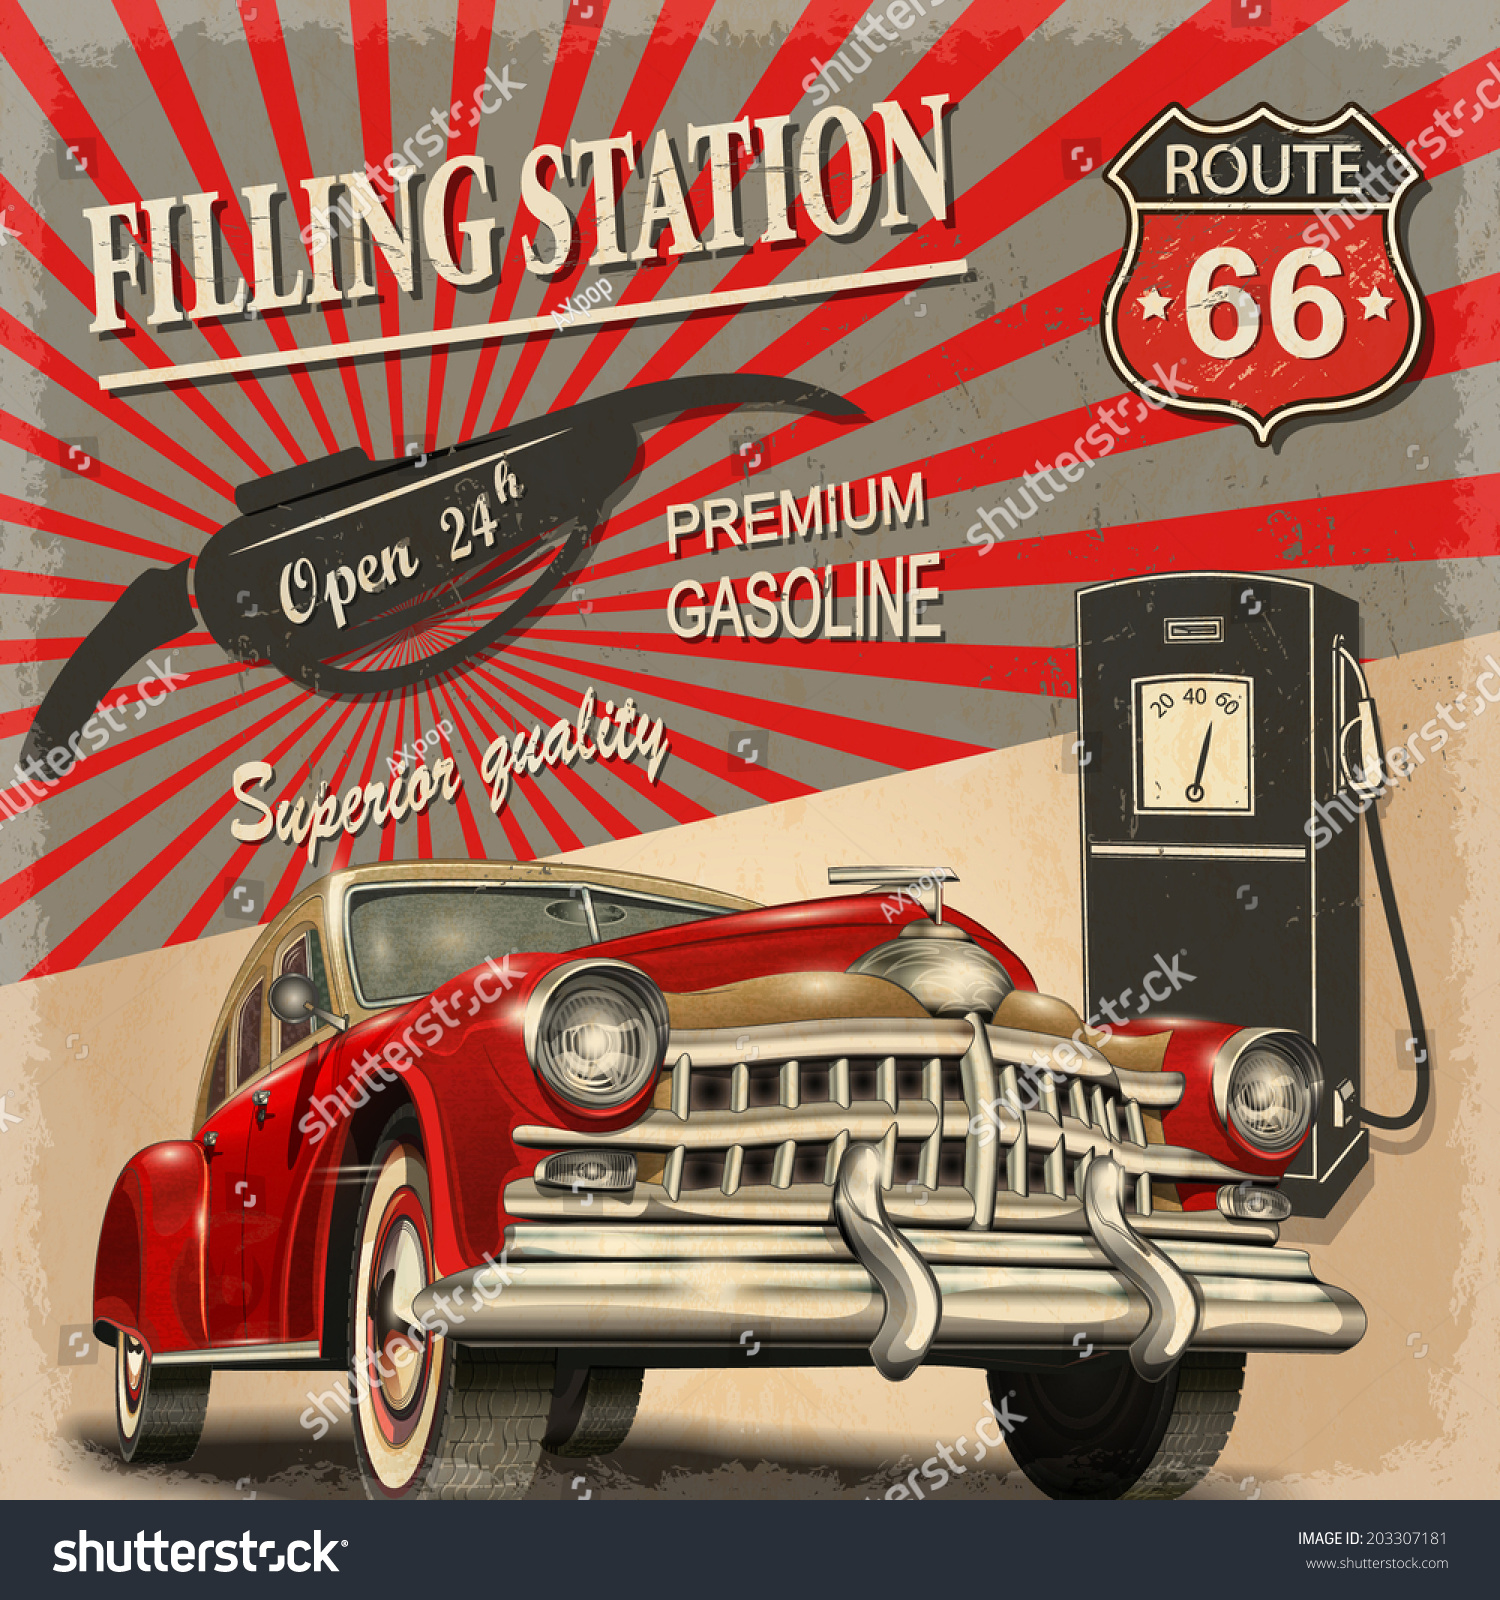 Filling Station Retro Poster Stock Vector (Royalty Free) 203307181 ...